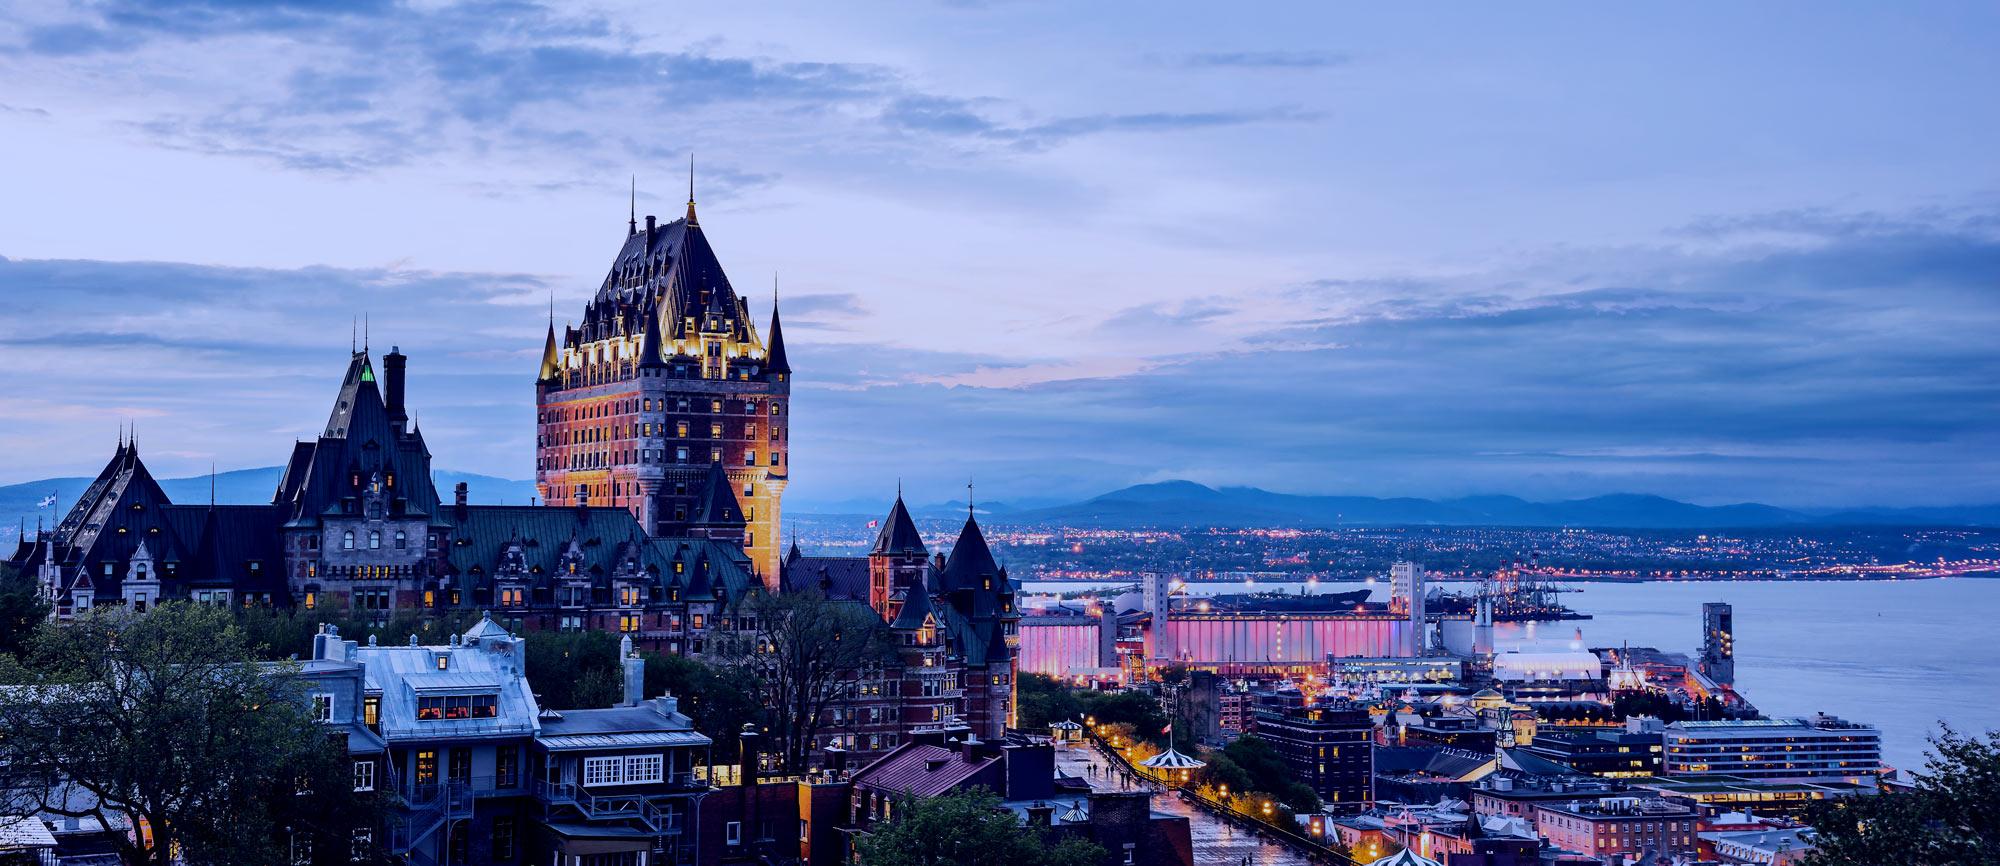 Cityscape or skyline of Quebec City, Canada, Chateau Frontenac, park and old town streets during sunset with illuminated castle, red Espace 400e building